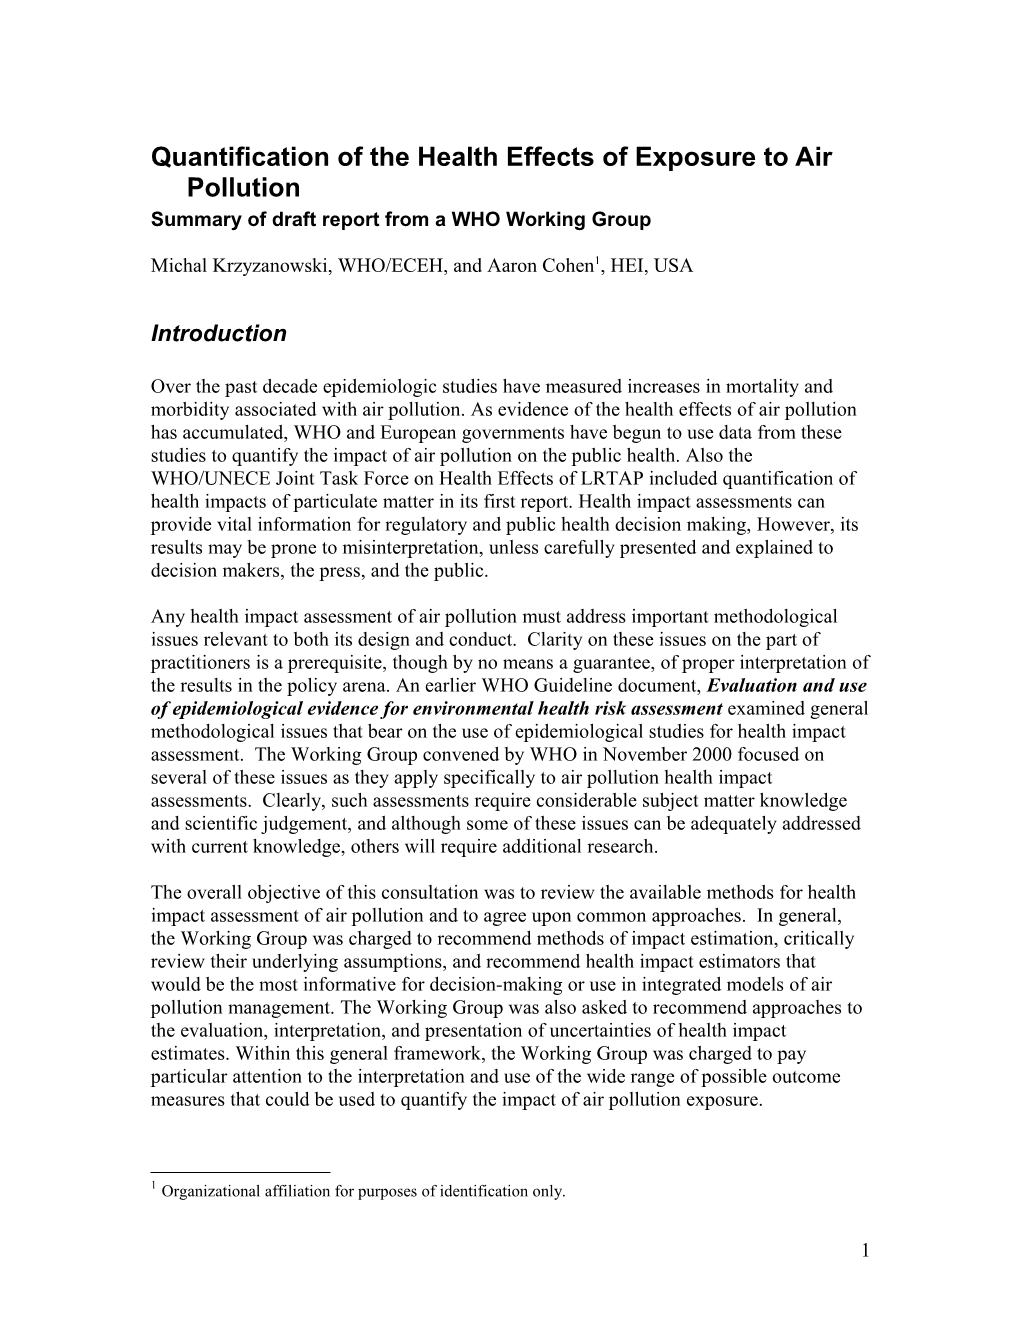 Quantification of the Health Effects of Exposure to Air Pollution